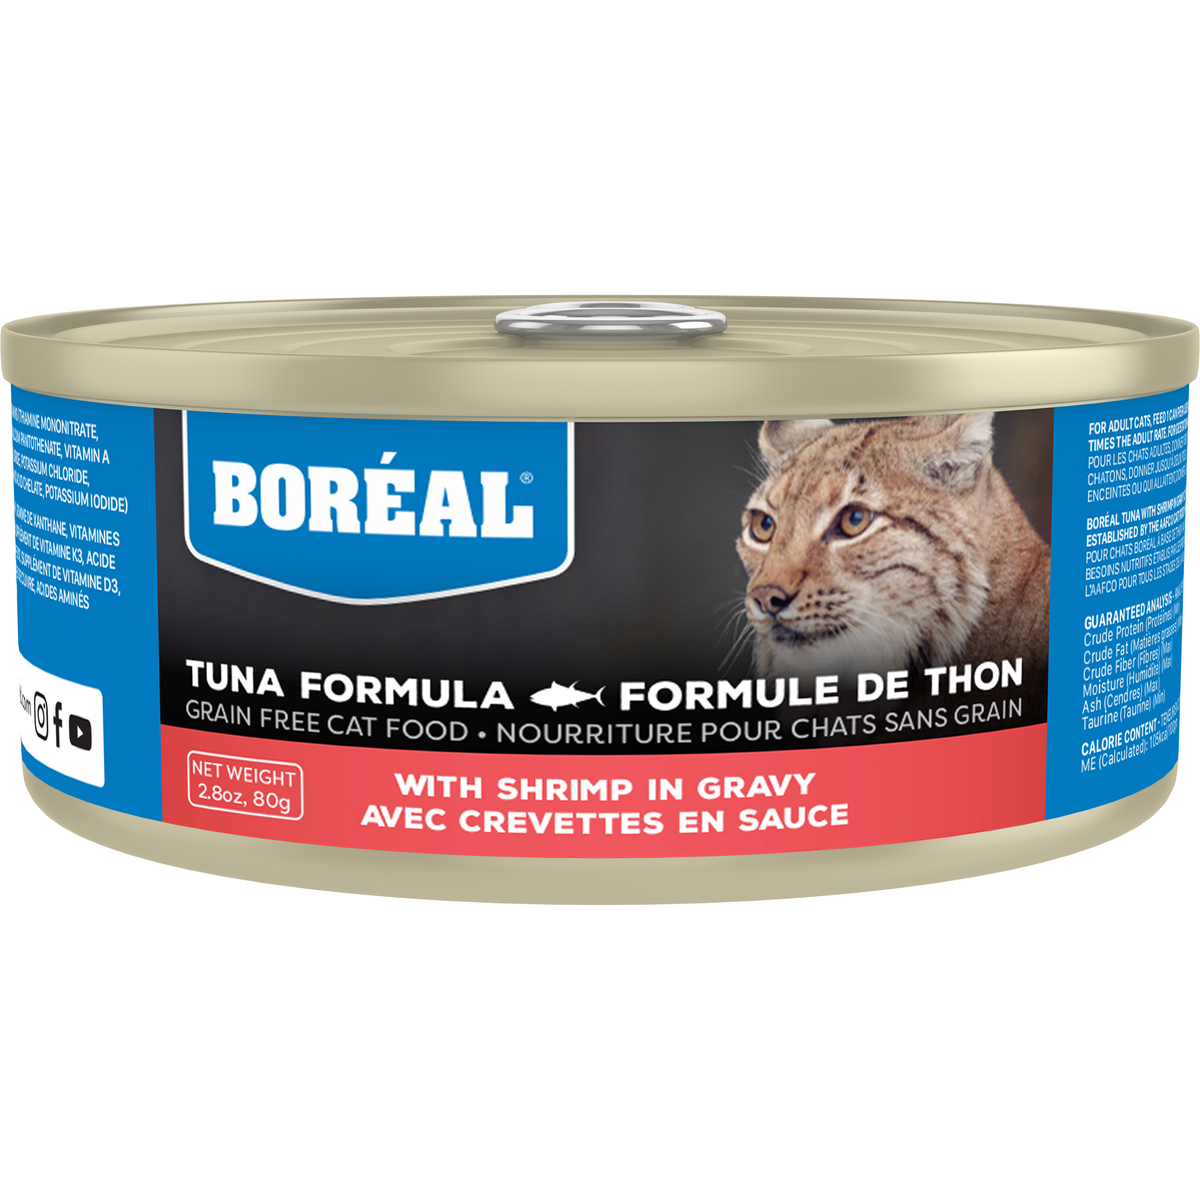 Boreal Tuna Formula - Red Tuna with Shrimp in Gravy - Canned Cat Food